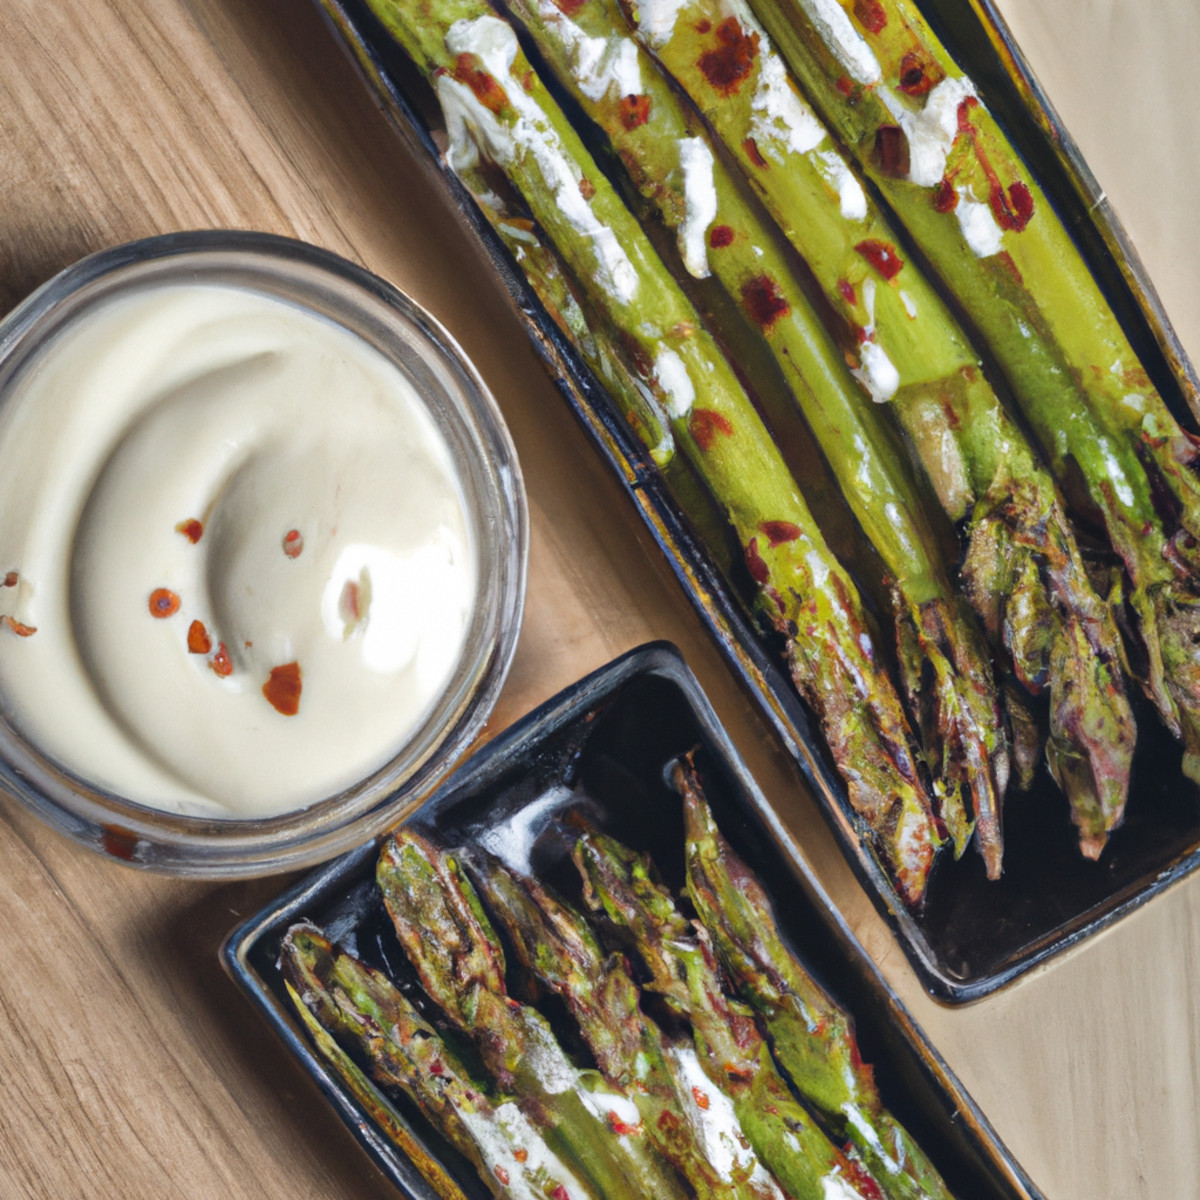 herby asparagus with dipping sauces